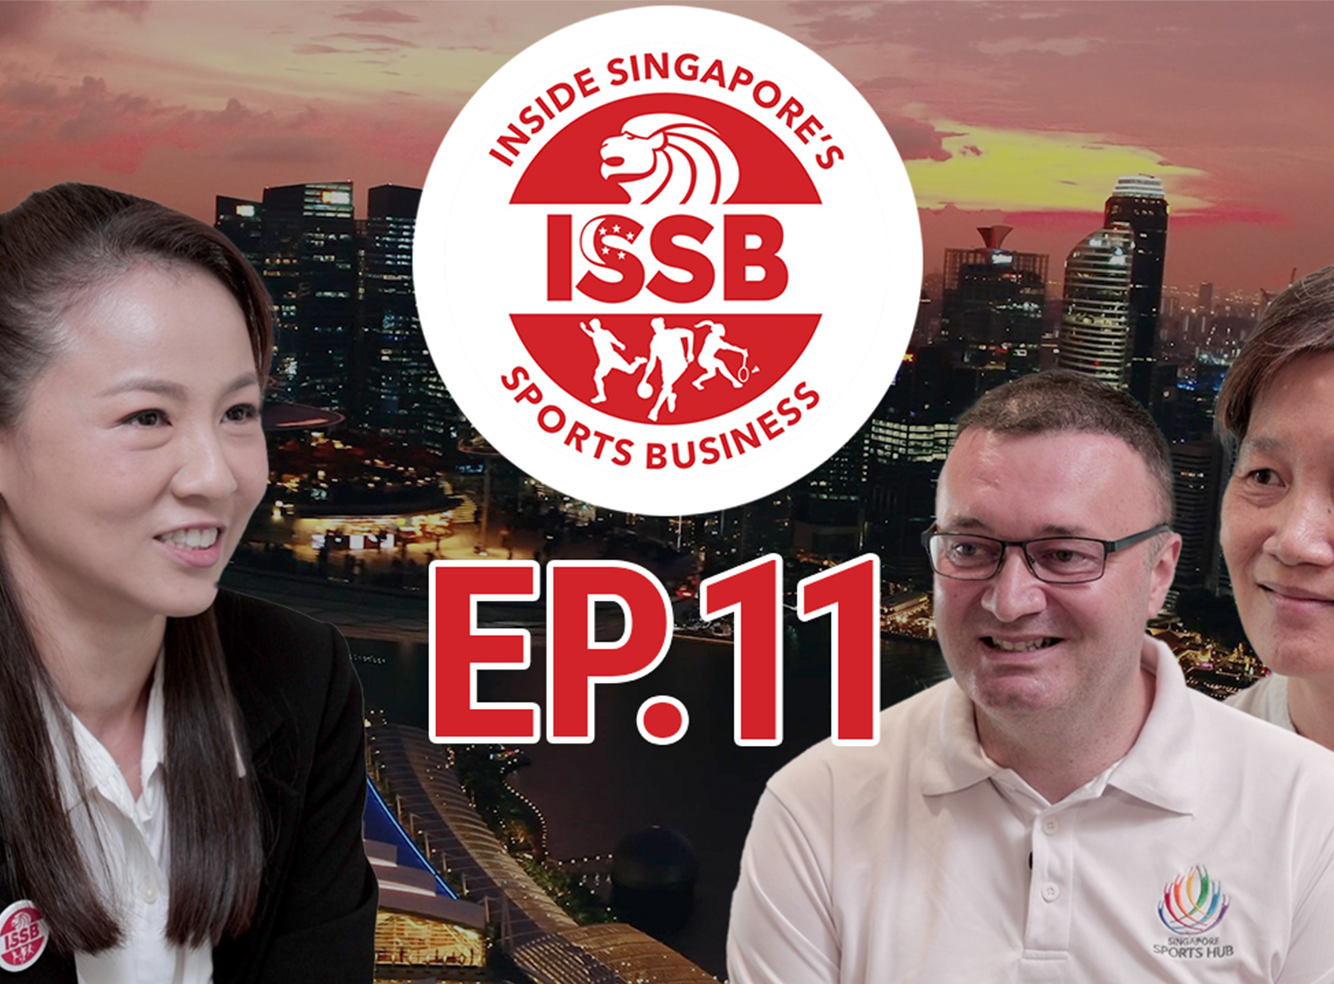 Episode 11 - Sports Events - Mass Spectator Events at SportsHub